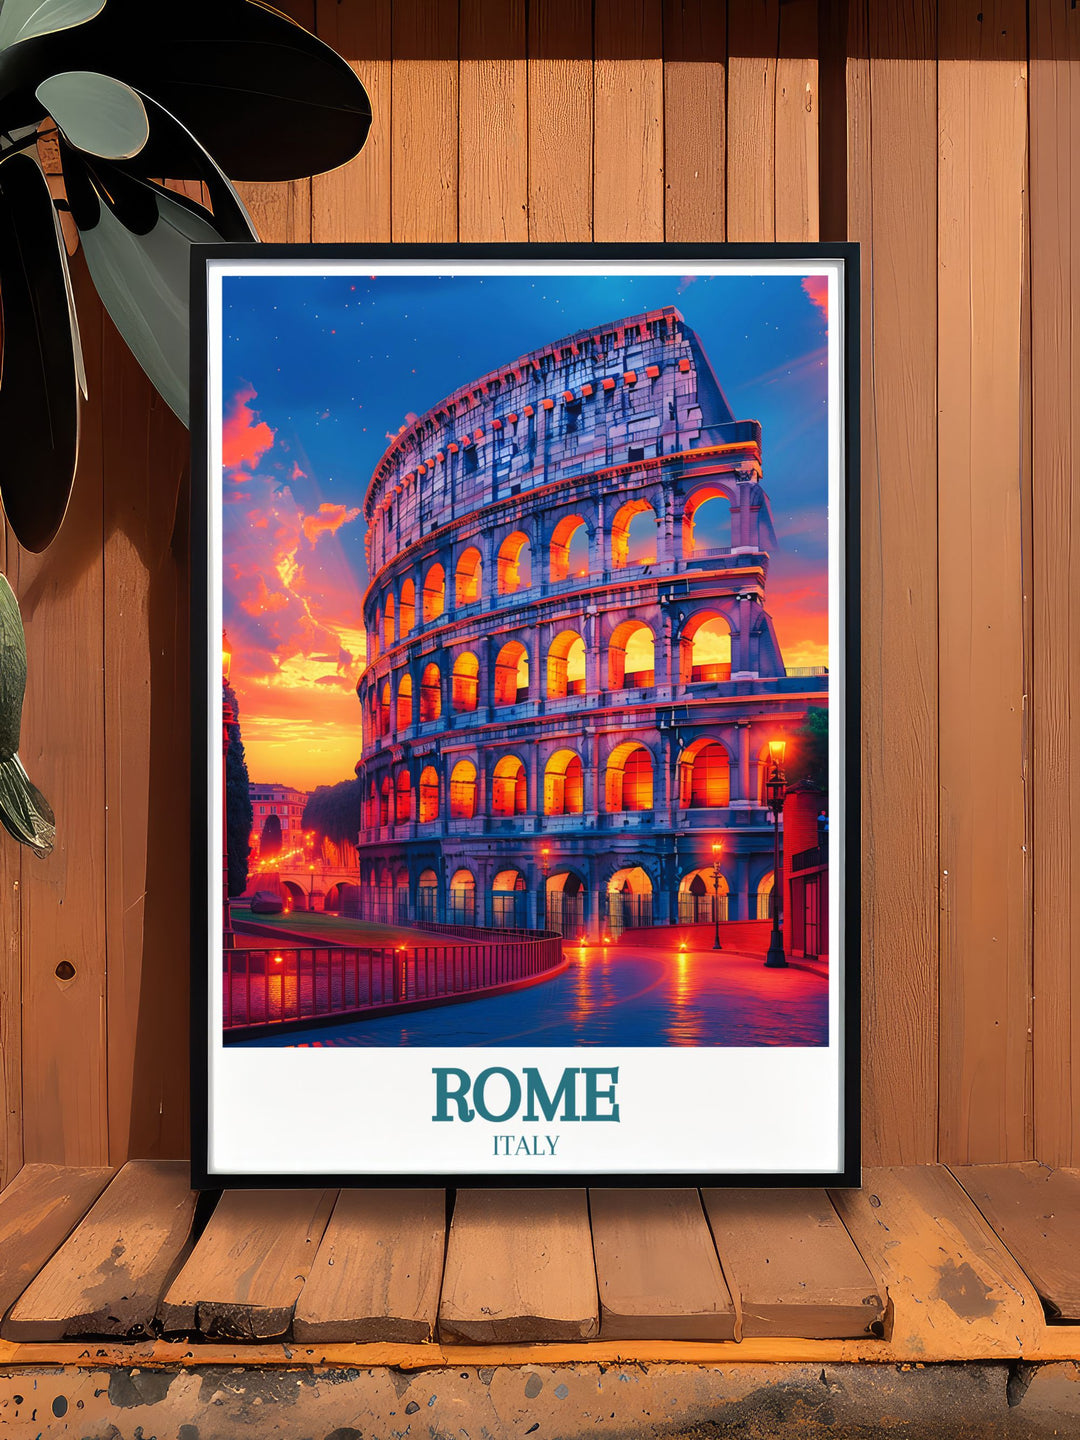 Beautiful Rome wall art capturing the grandeur of the Colosseum and Vatican City in intricate detail perfect for adding a touch of sophistication to your living room bedroom or office ideal for special occasions like anniversaries and birthdays.